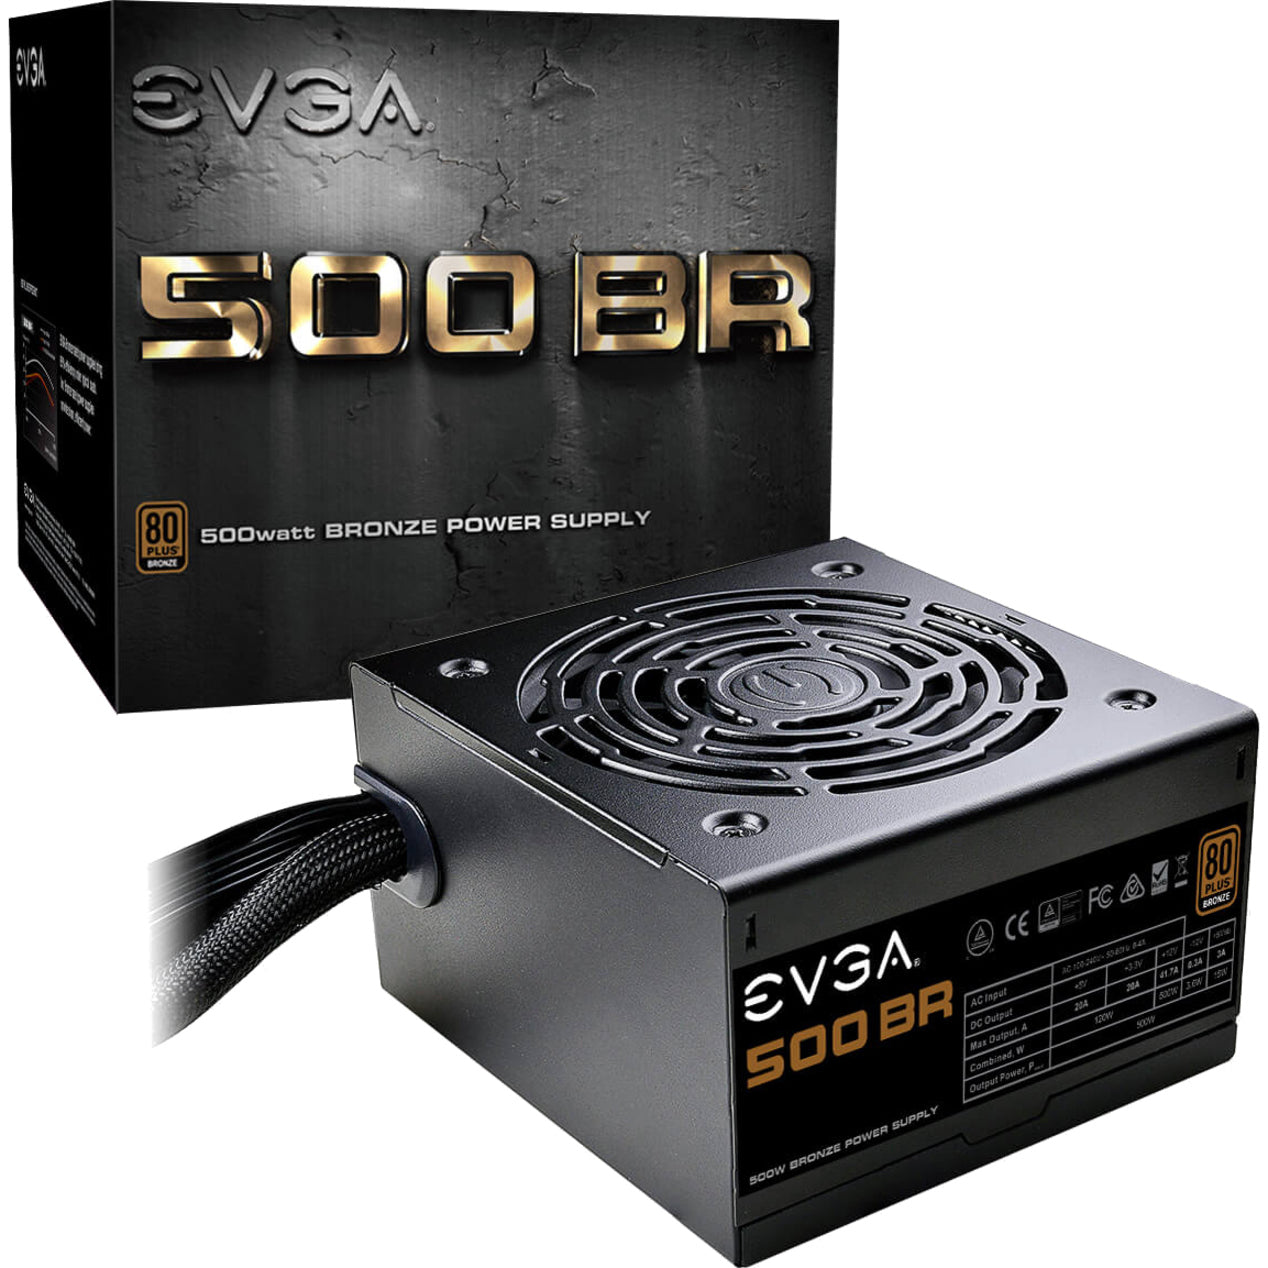 EVGA 100-BR-0500-K1 BR Power Supply, 500W, 85% Efficiency, NVIDIA SLI and ATI CrossFire Supported